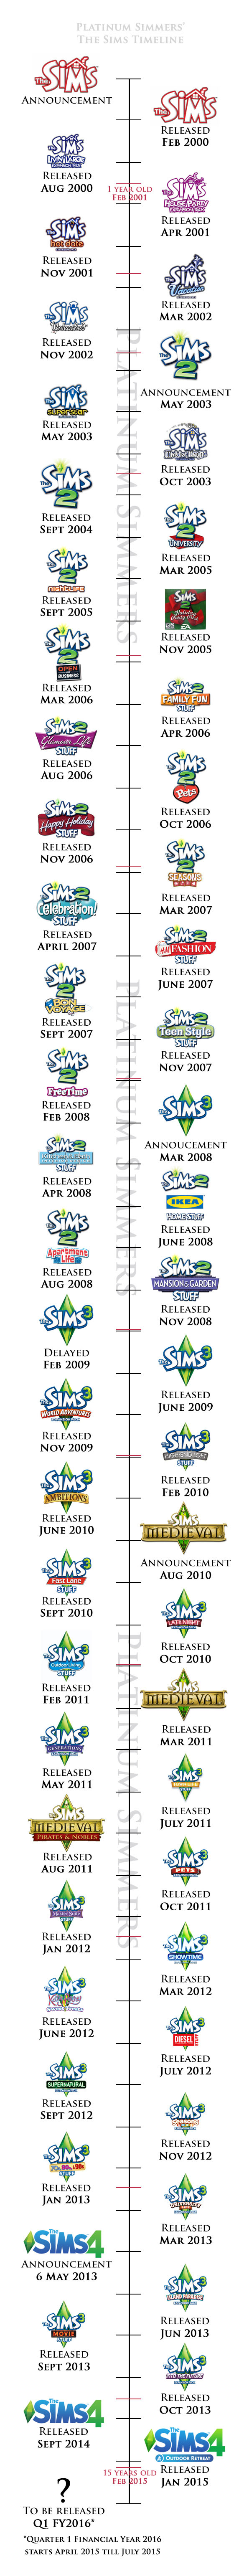 PS_Sims_history_Vertical